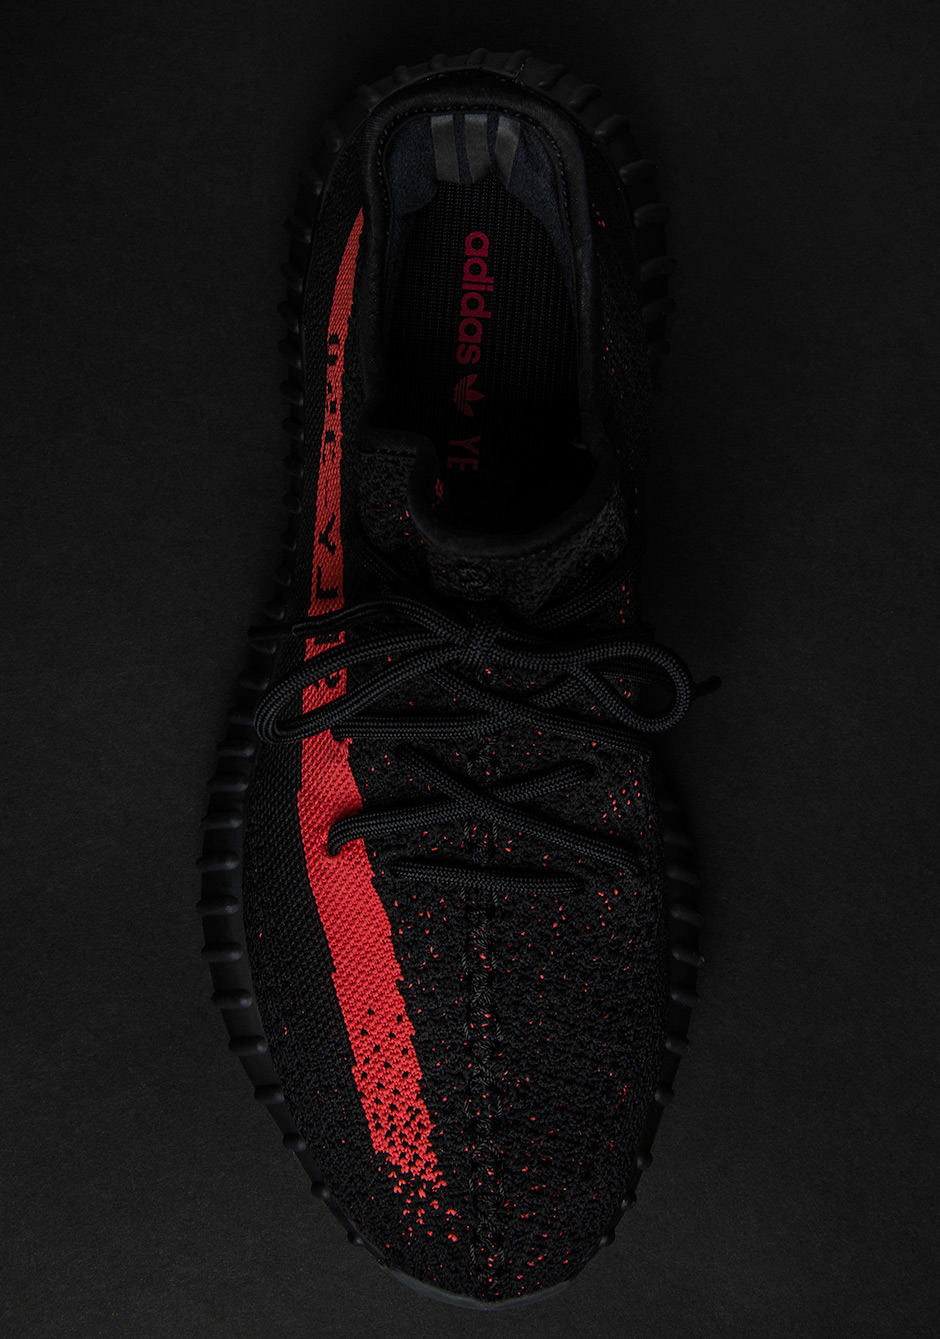 Adidas Yeezy Boost 350 v2 Bred Core Red Black Size 8 NYC